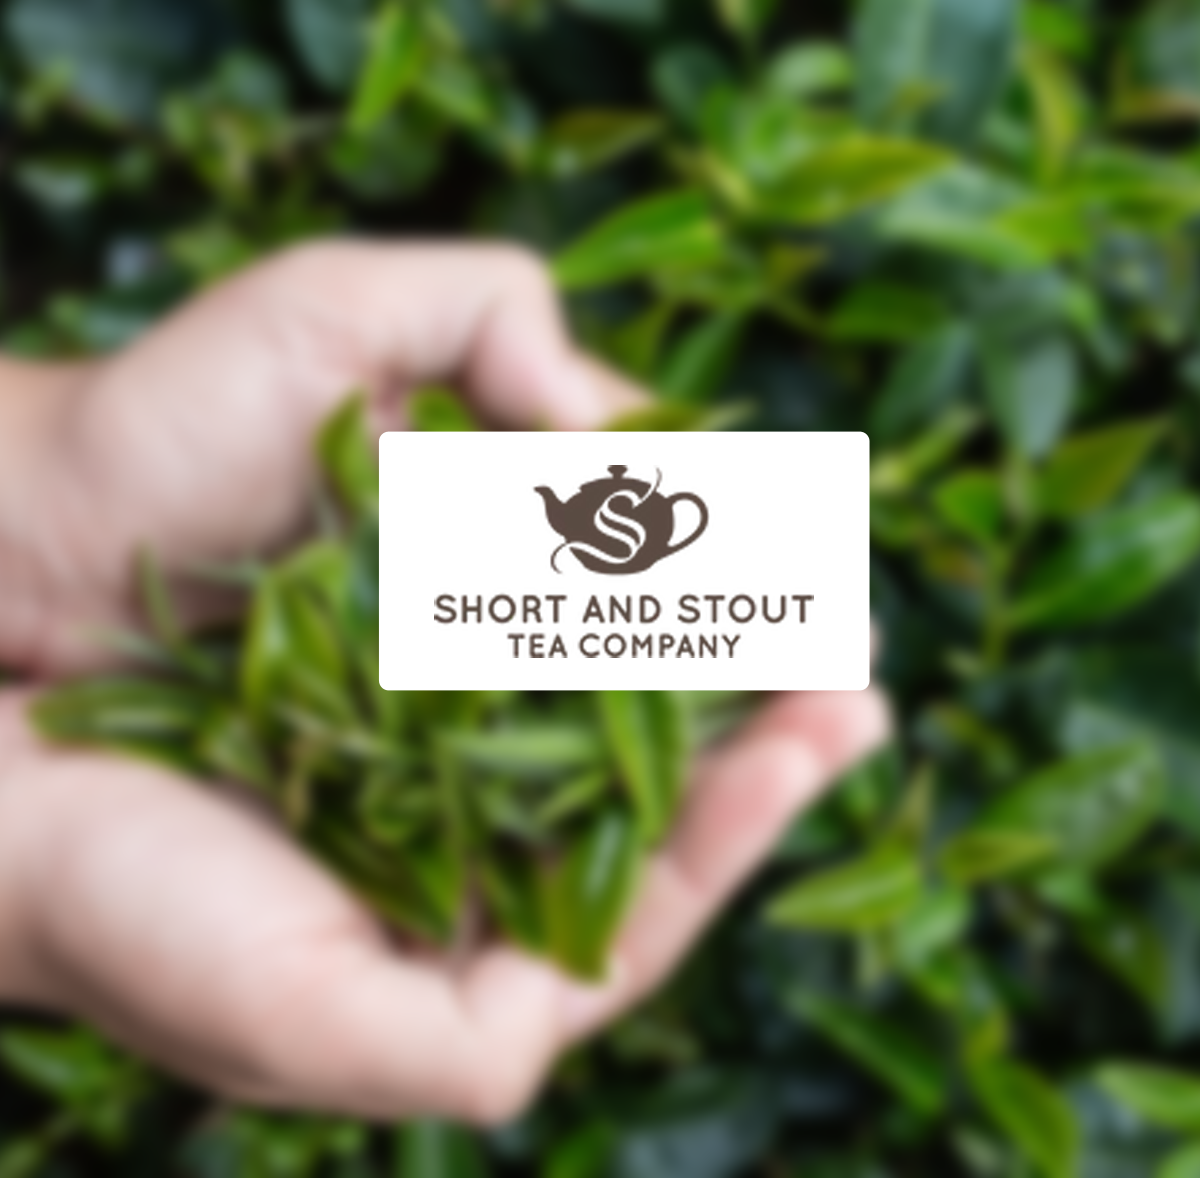 What’s Brewing at Short and Stout Tea